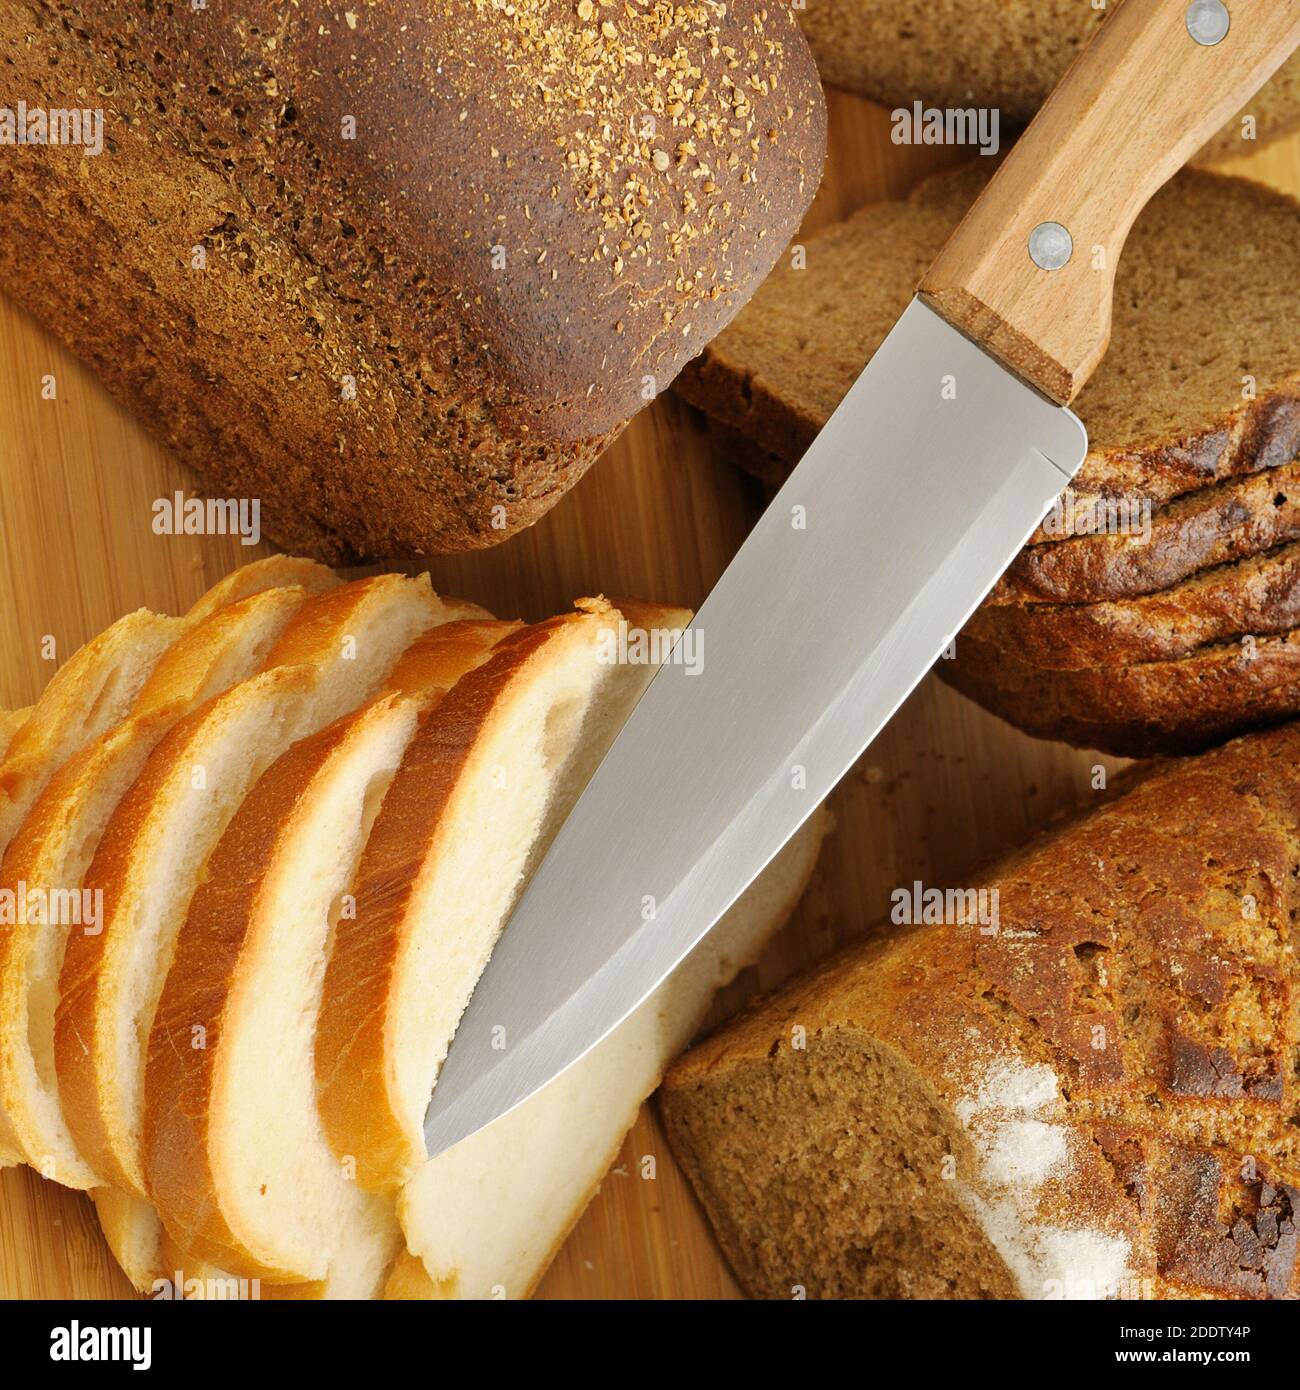 cut bread and knife Stock Photo